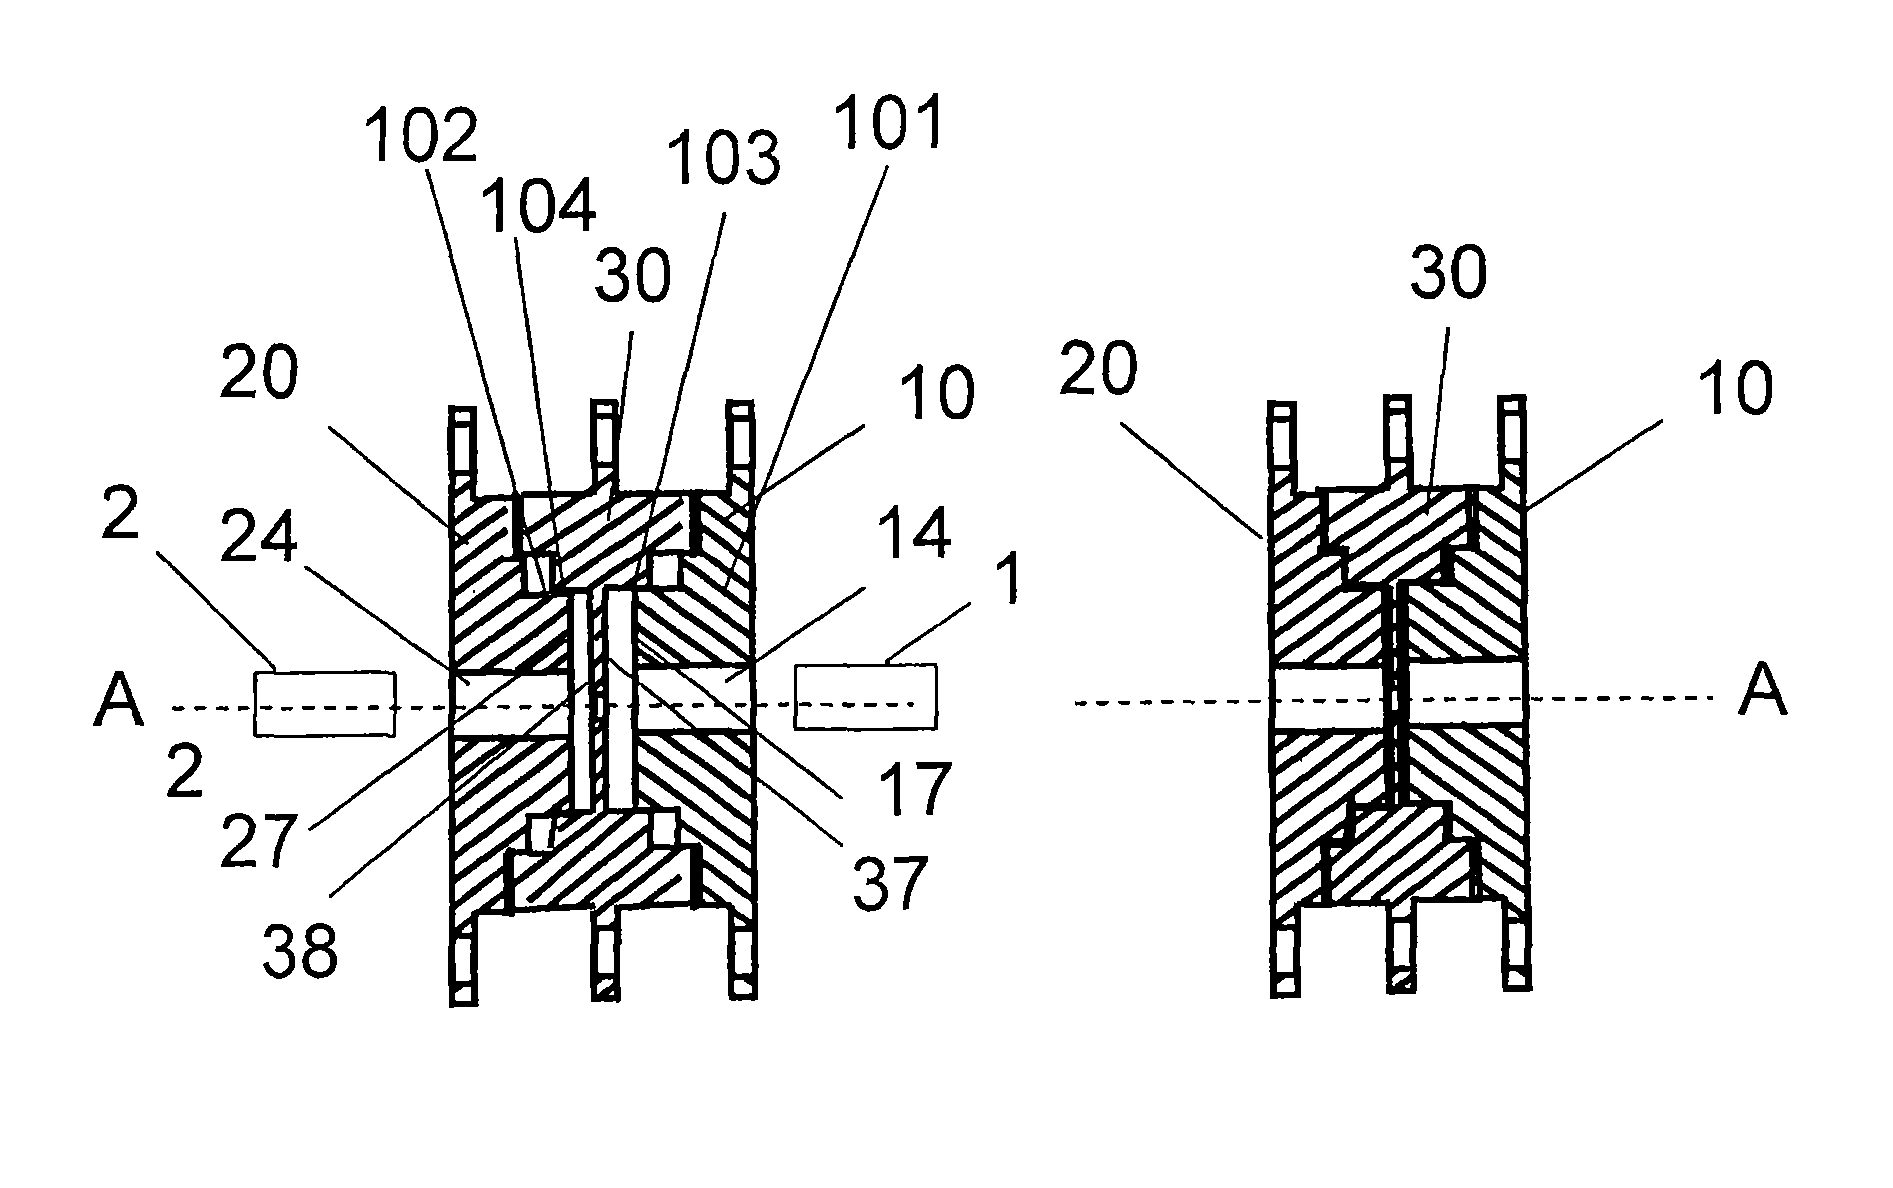 Rotary joint for switchably rotating between a jointed and non-jointed state to provide for polarization rotation